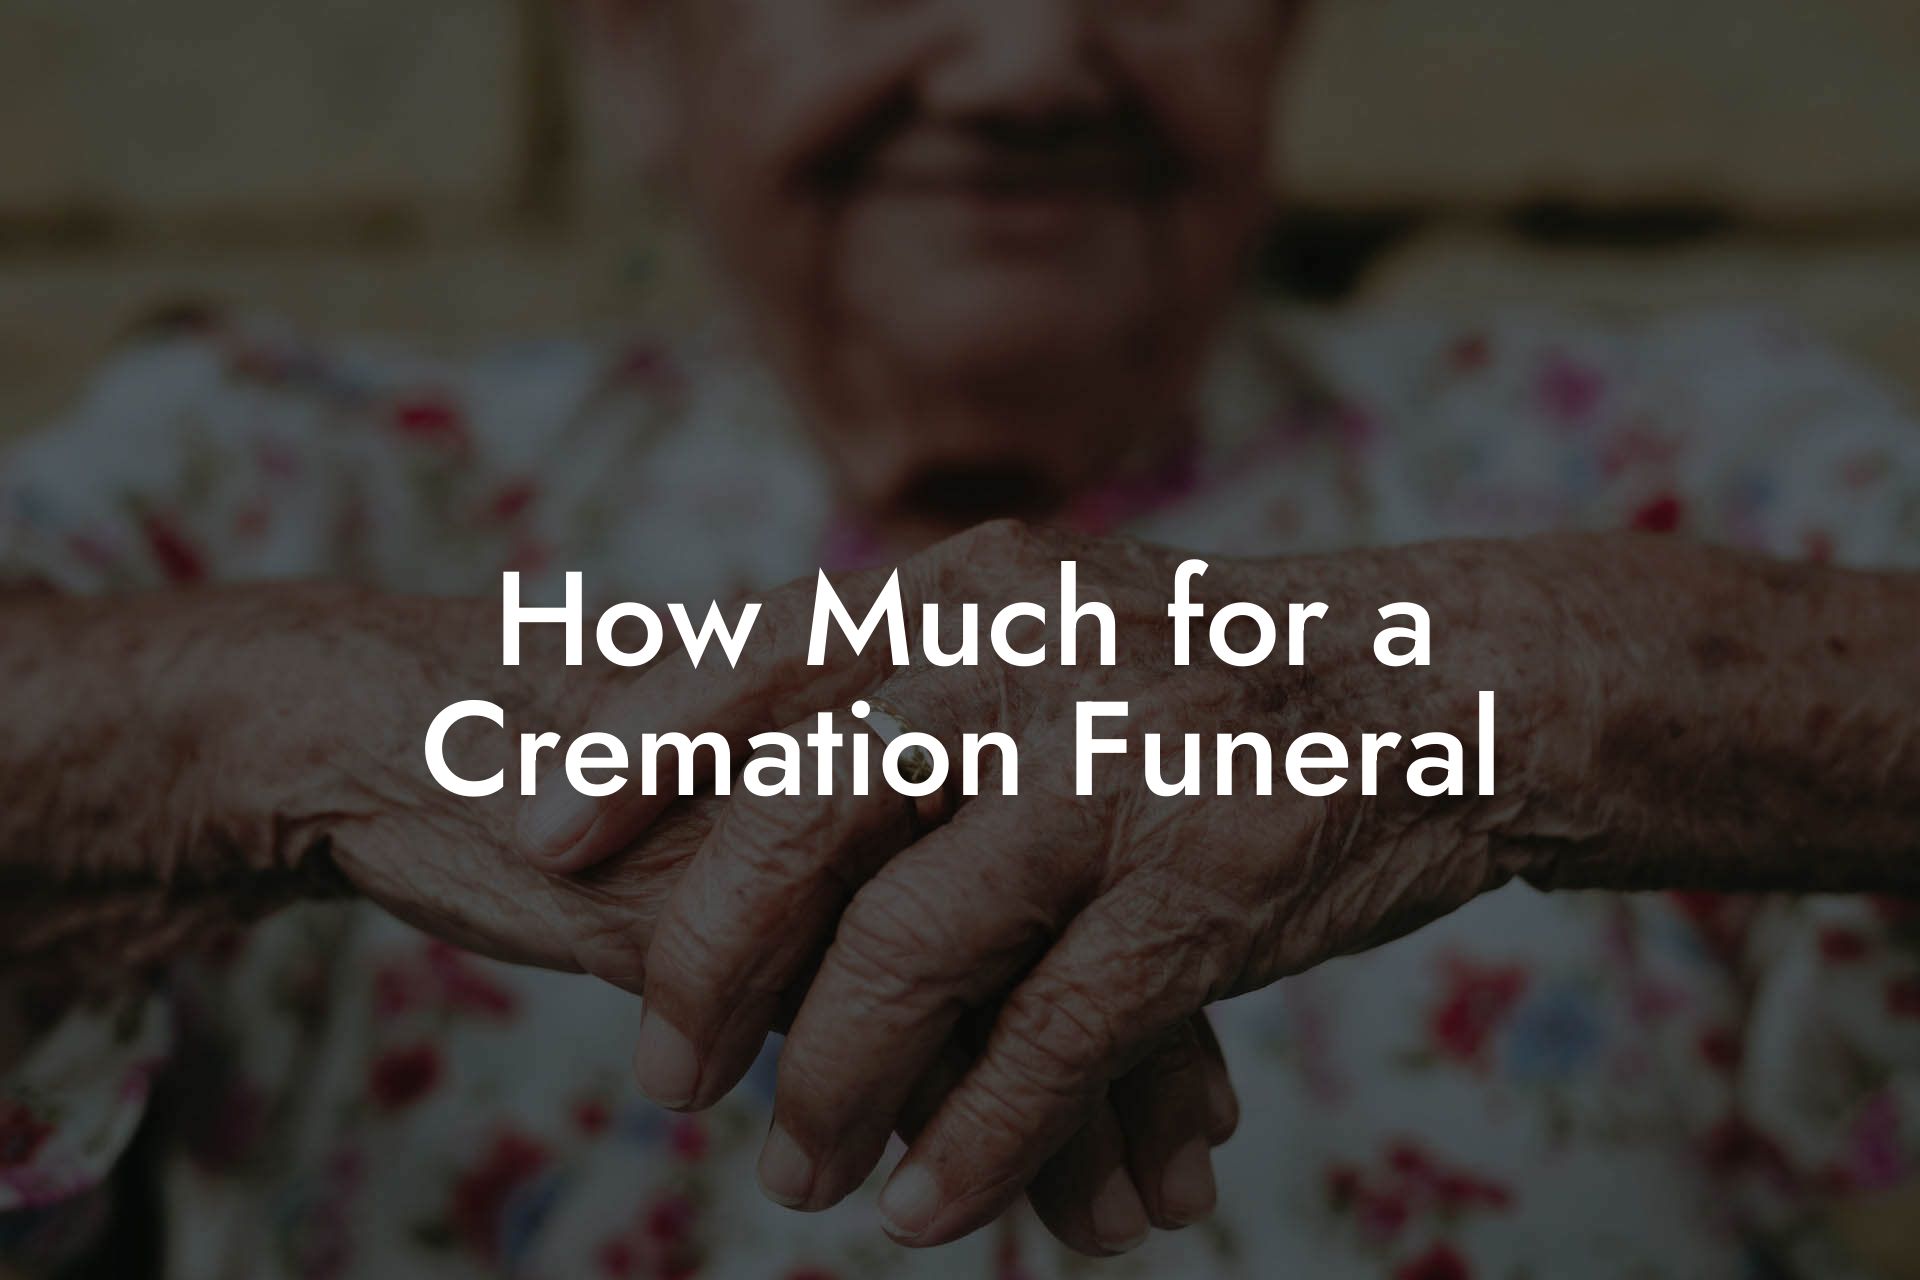 How Much for a Cremation Funeral